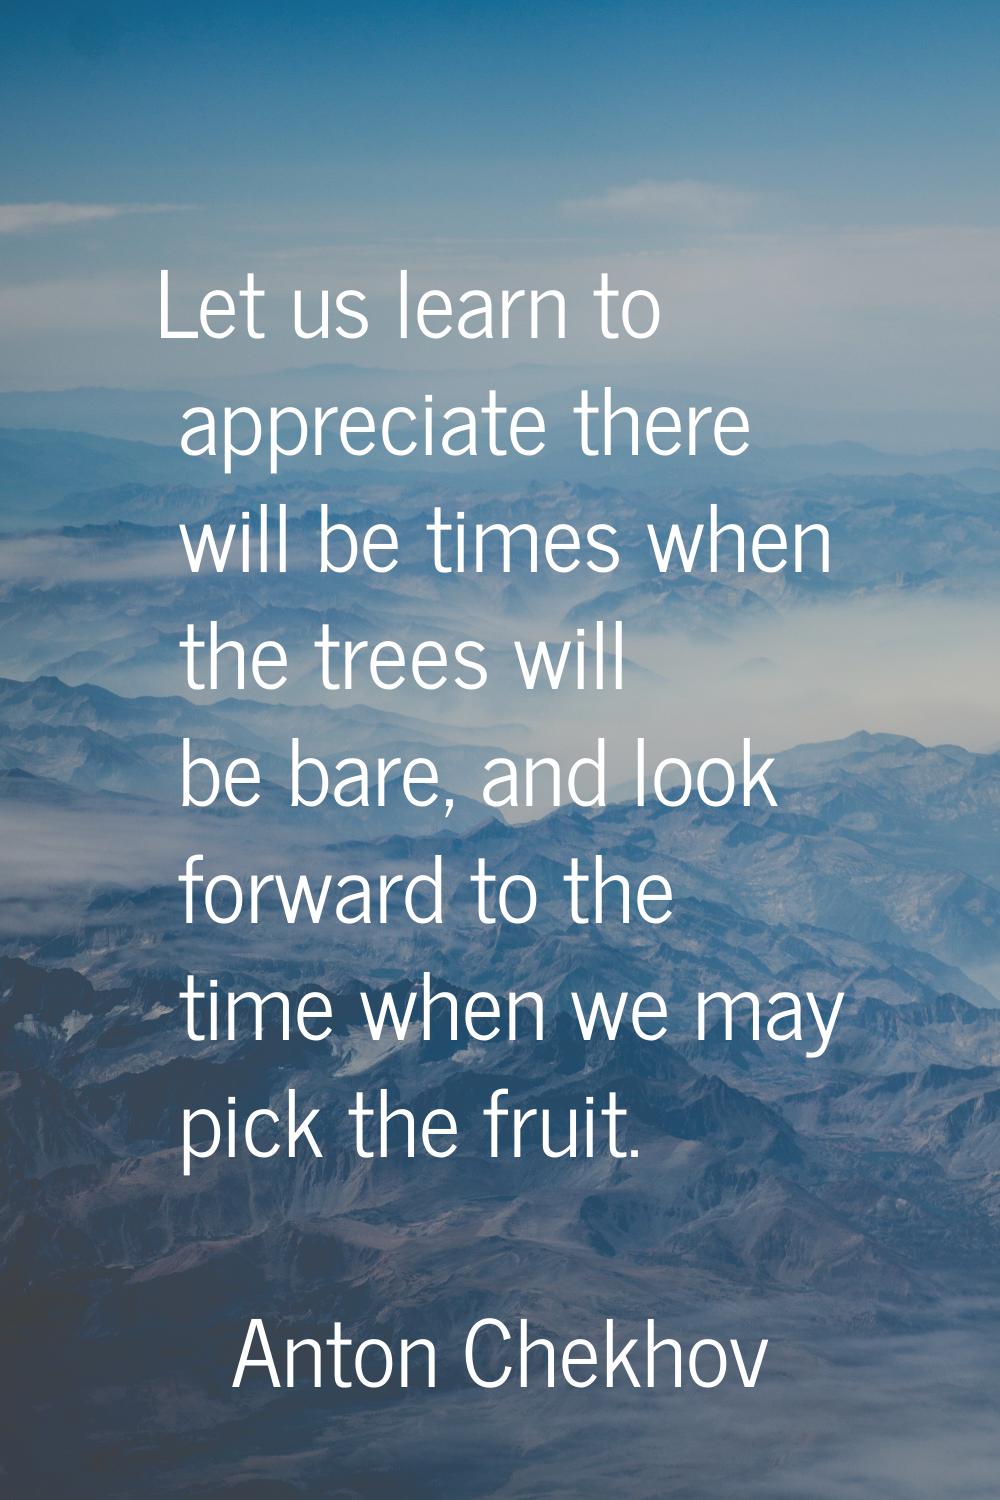 Let us learn to appreciate there will be times when the trees will be bare, and look forward to the